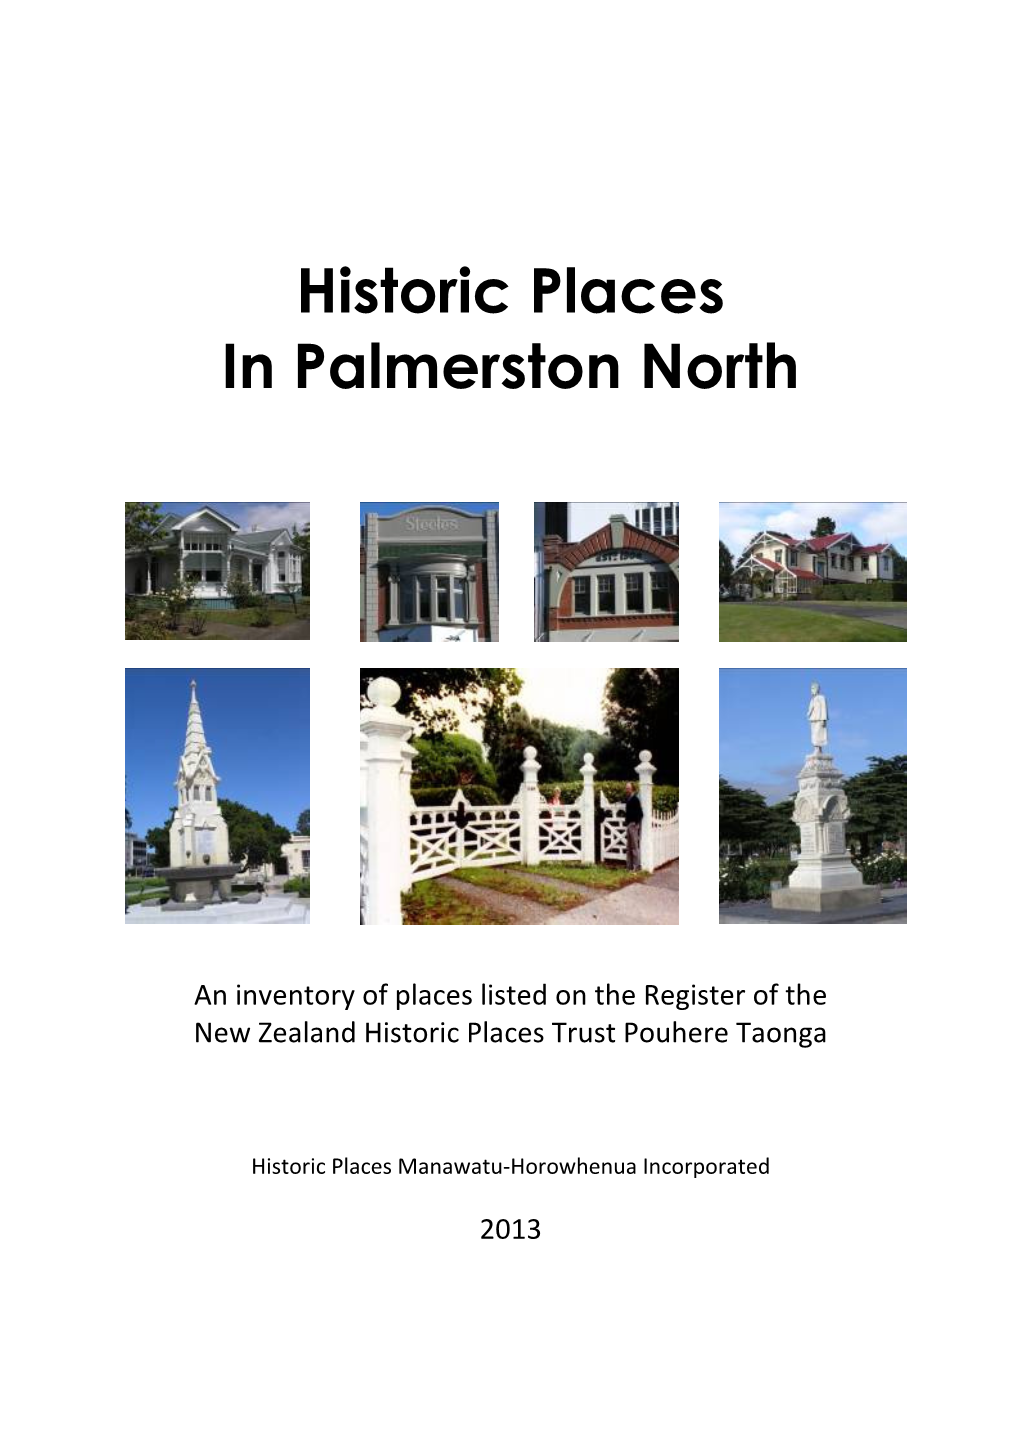 Historic Places in Palmerston North